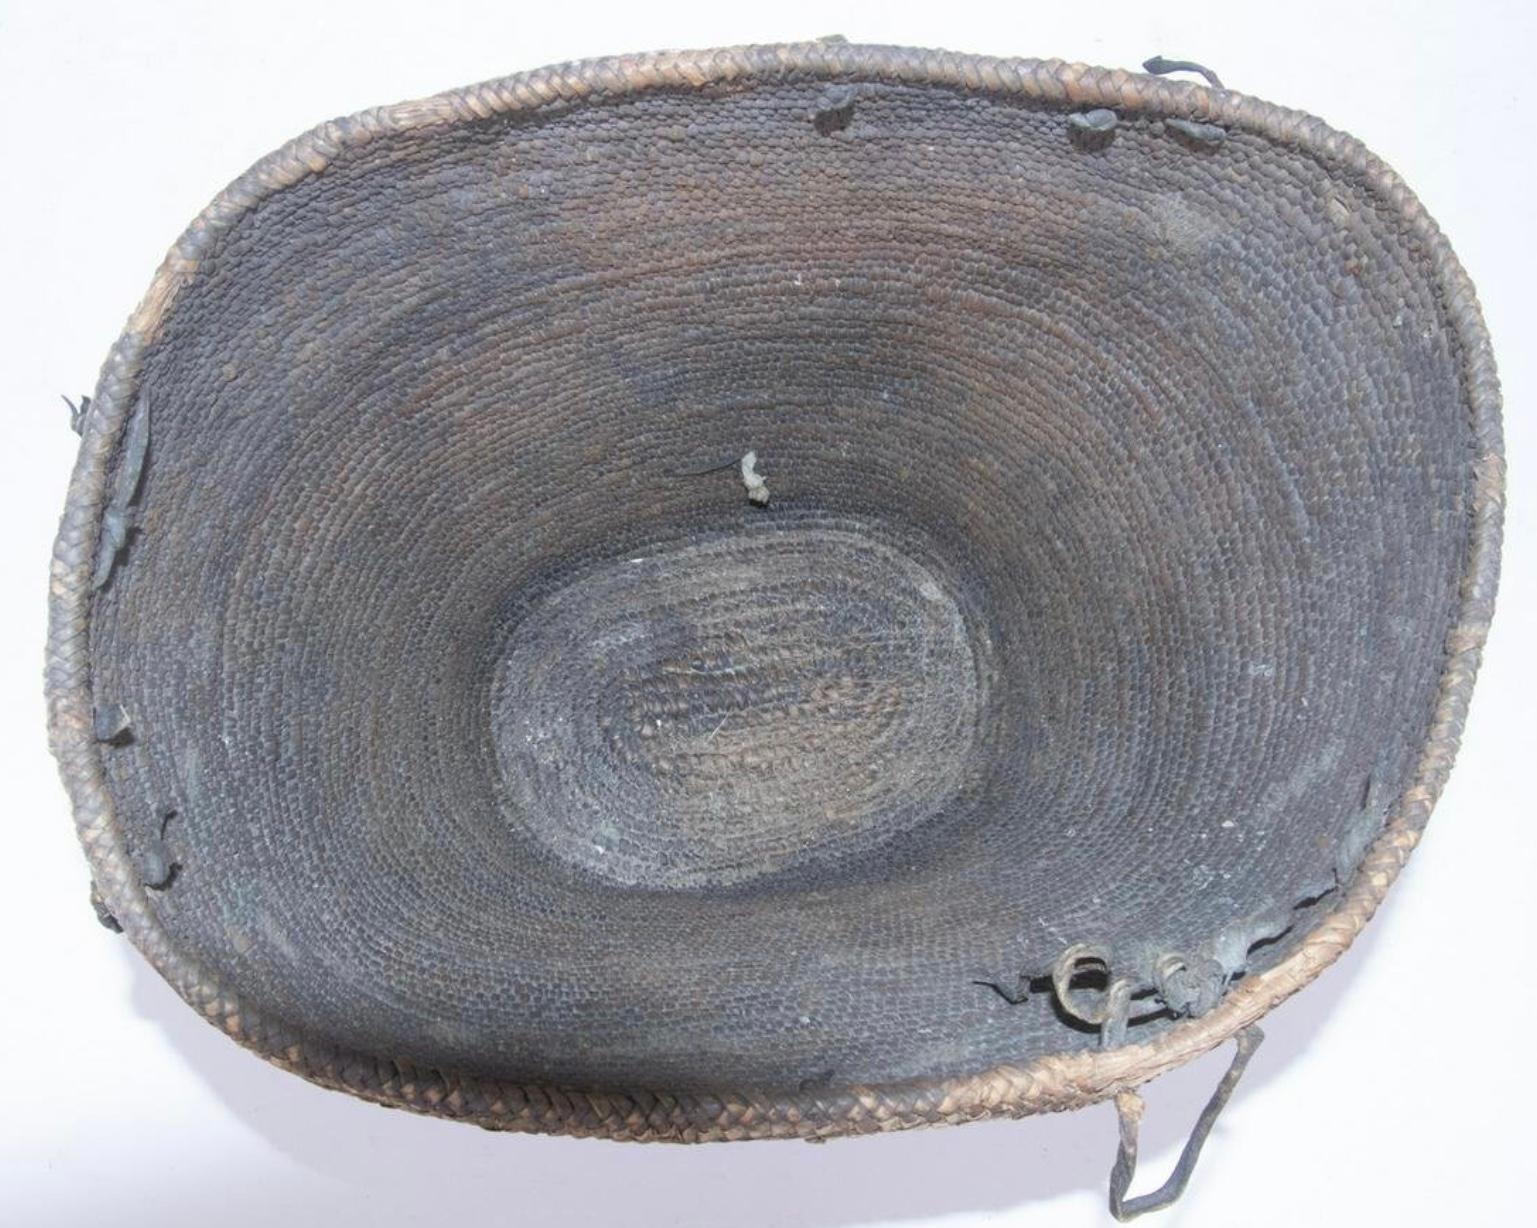 Rare large early Northwest Coast Salish hard burden basket dating from the mid to late 1800's. The basket is finely woven from split cedar bark and root that form a wave pattern that encircles the periphery. Note the old deer hide strap carrying